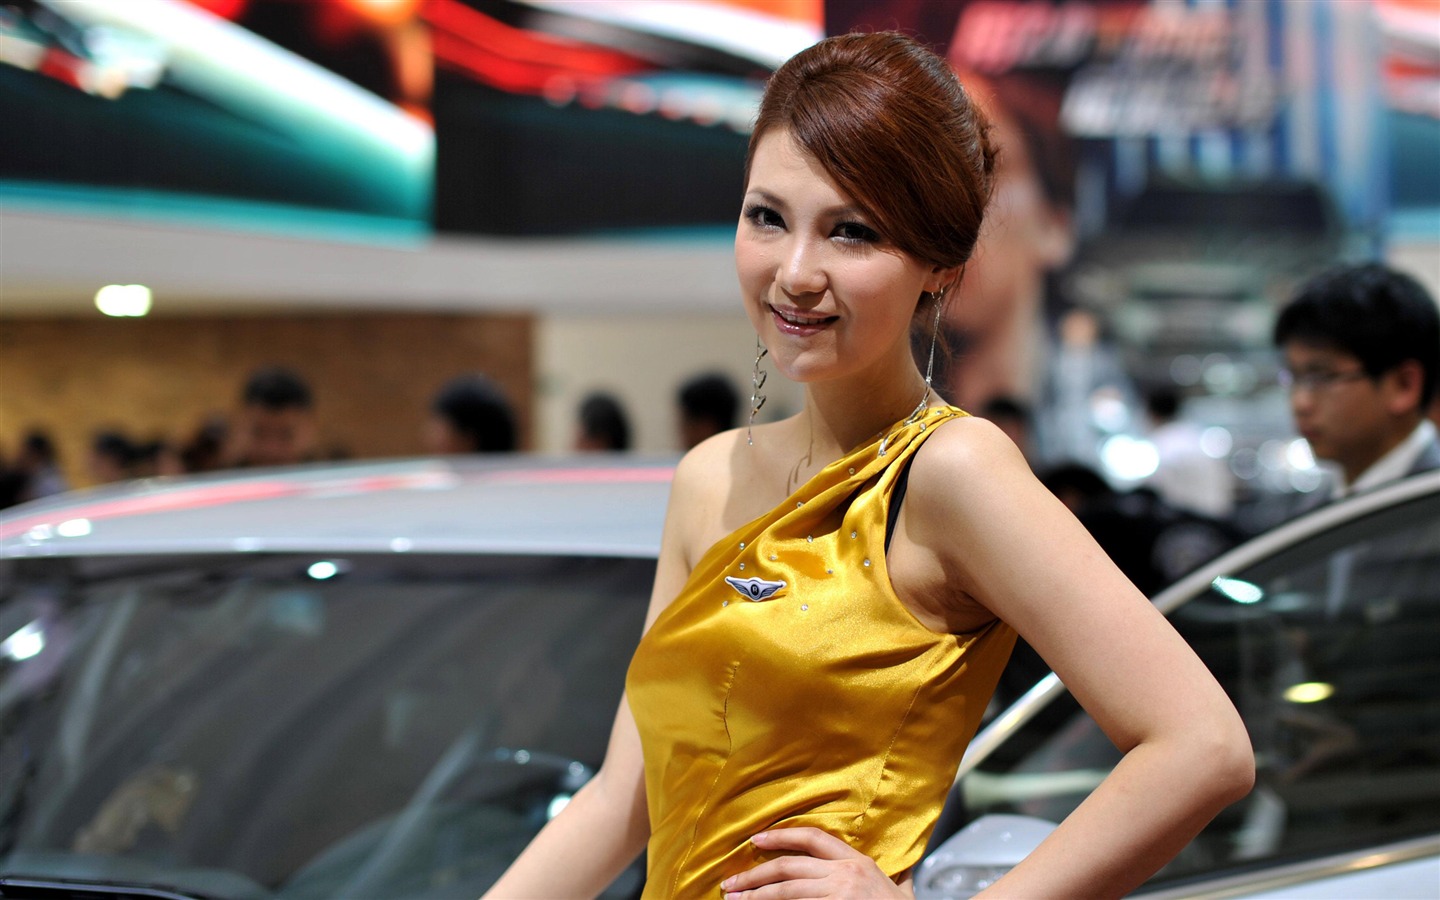 2010 Beijing Auto Show beauty (Kuei-east of the first works) #1 - 1440x900